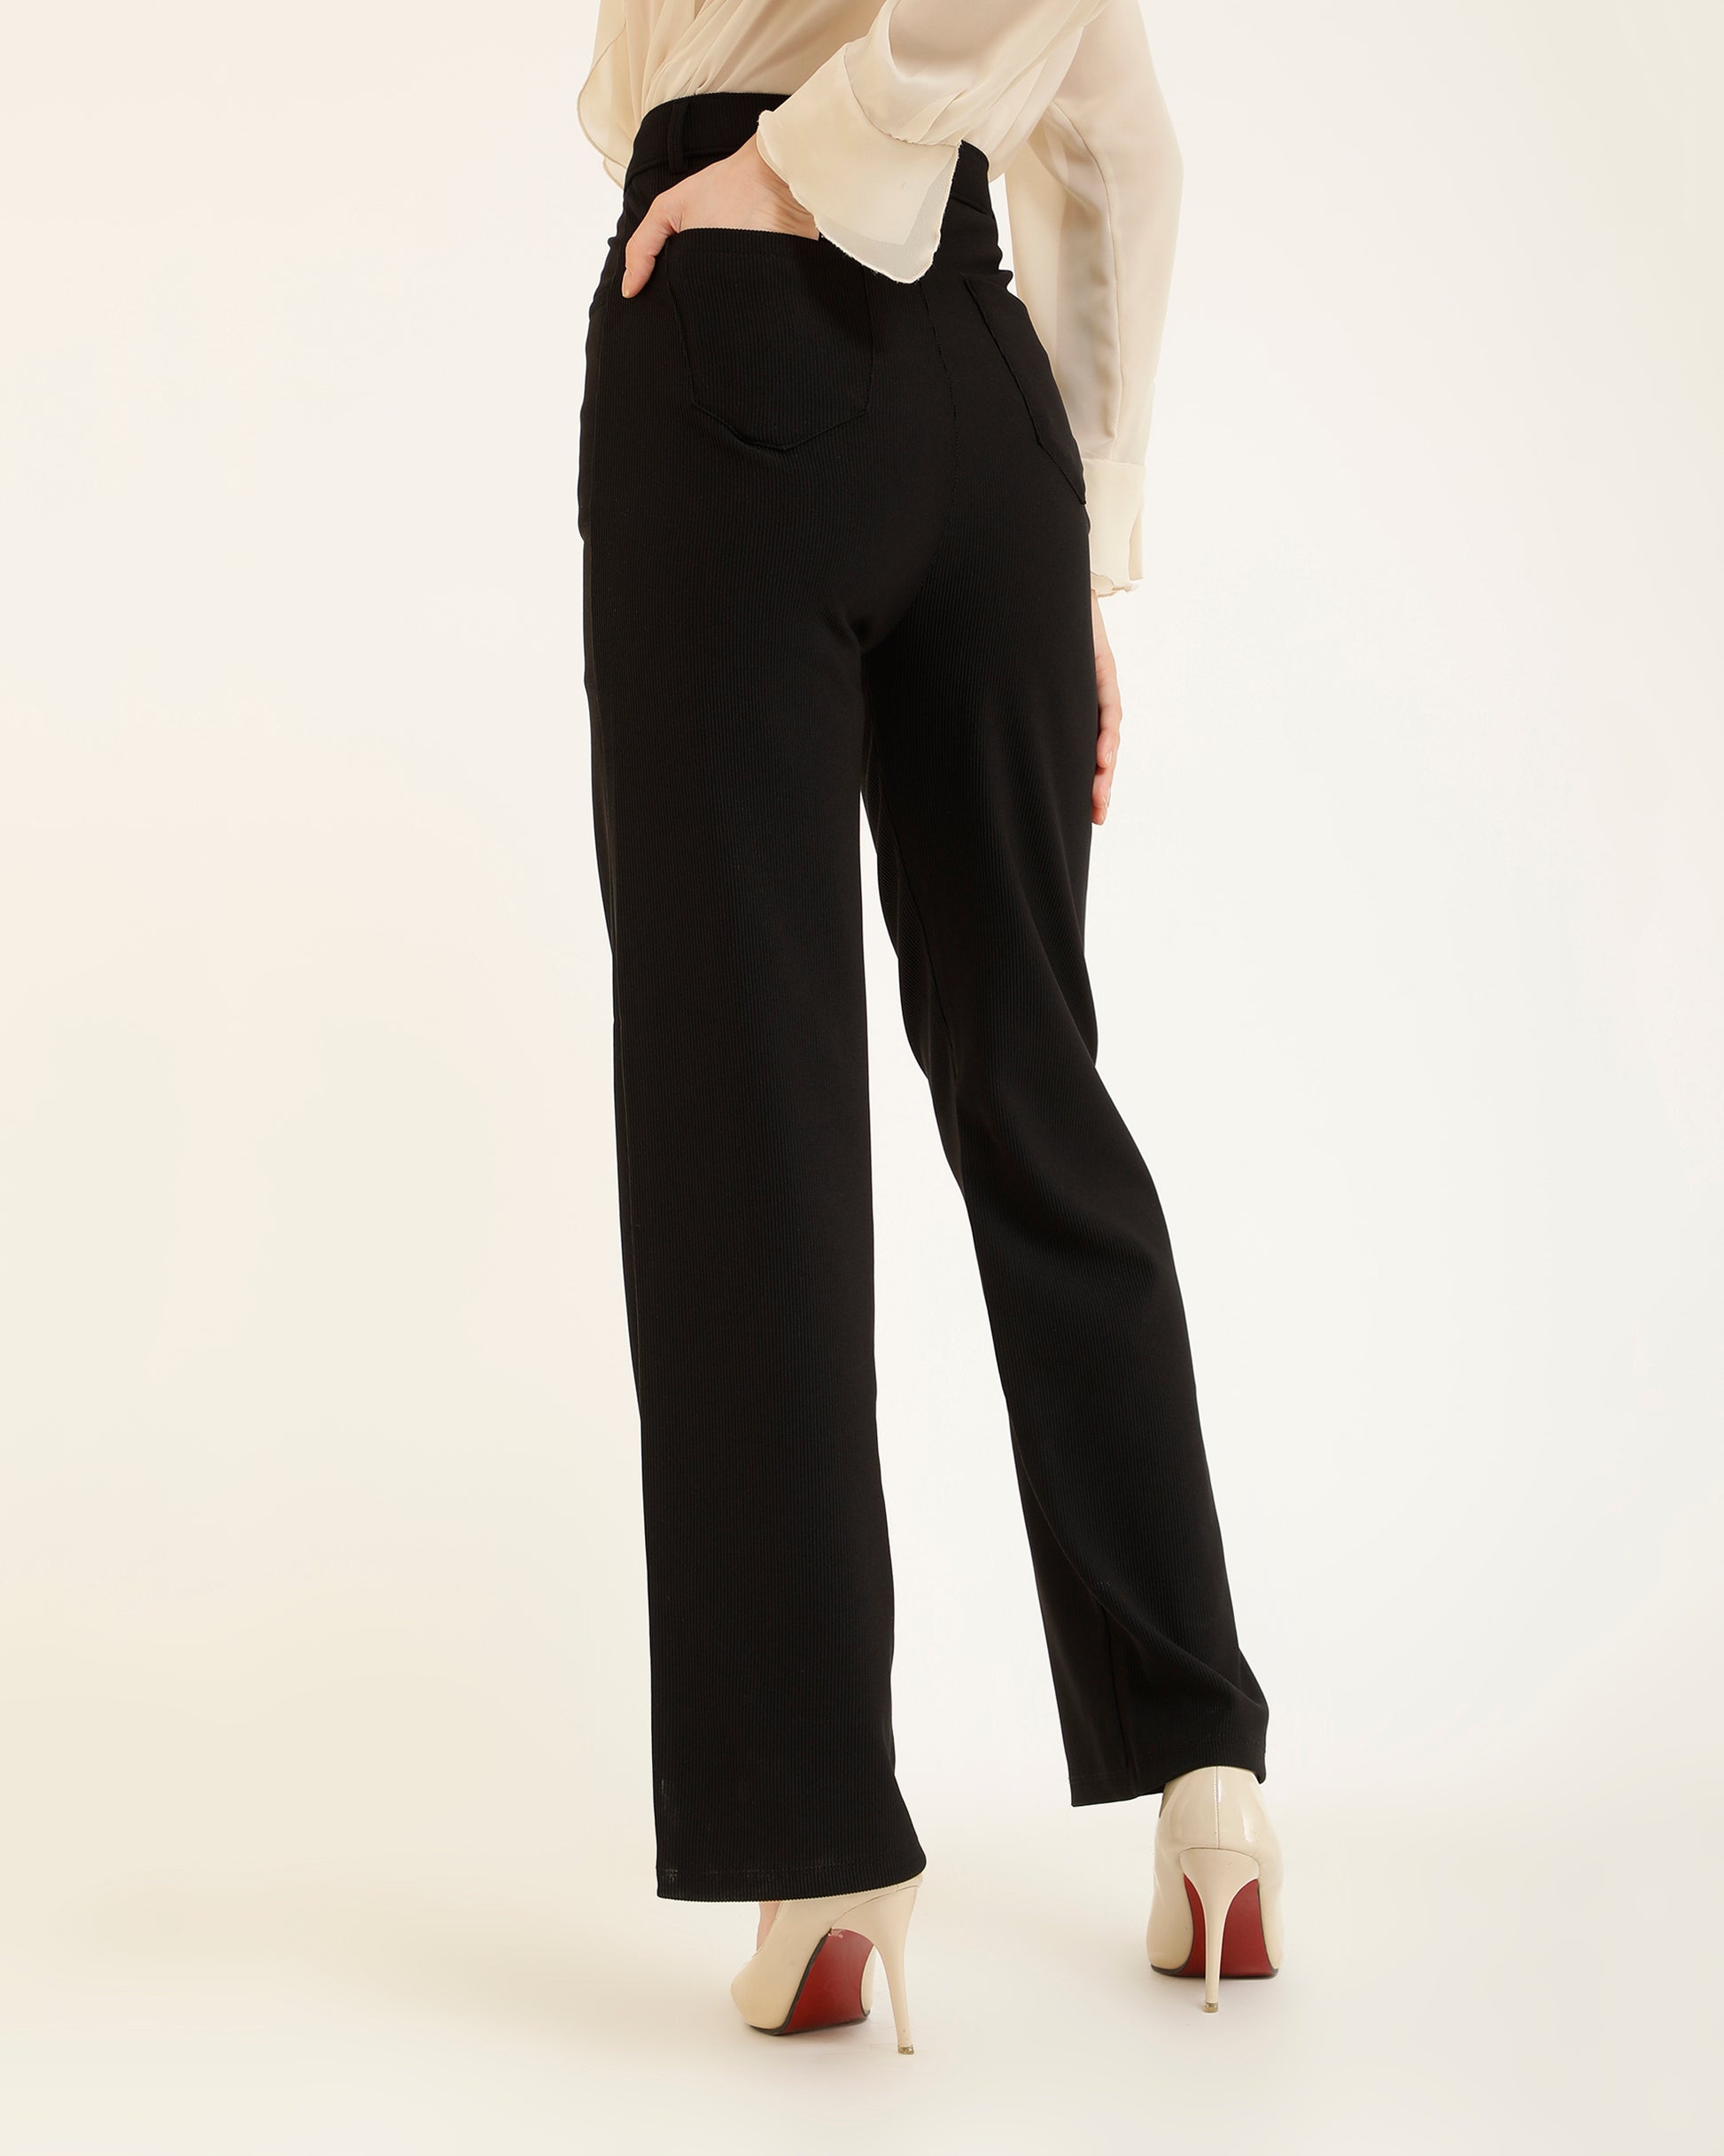 RIBBED TROUSERS,black, bottomwear, formal, full length, high waist, ribbed, straight fit, trousers,ribbed-trousers-black,Length - Full Length (41 Inches) Waist - High Waist Fit- Straight Fit Color - BlackNo. of Pockets - 4 Closure - Zip &amp; Buttons